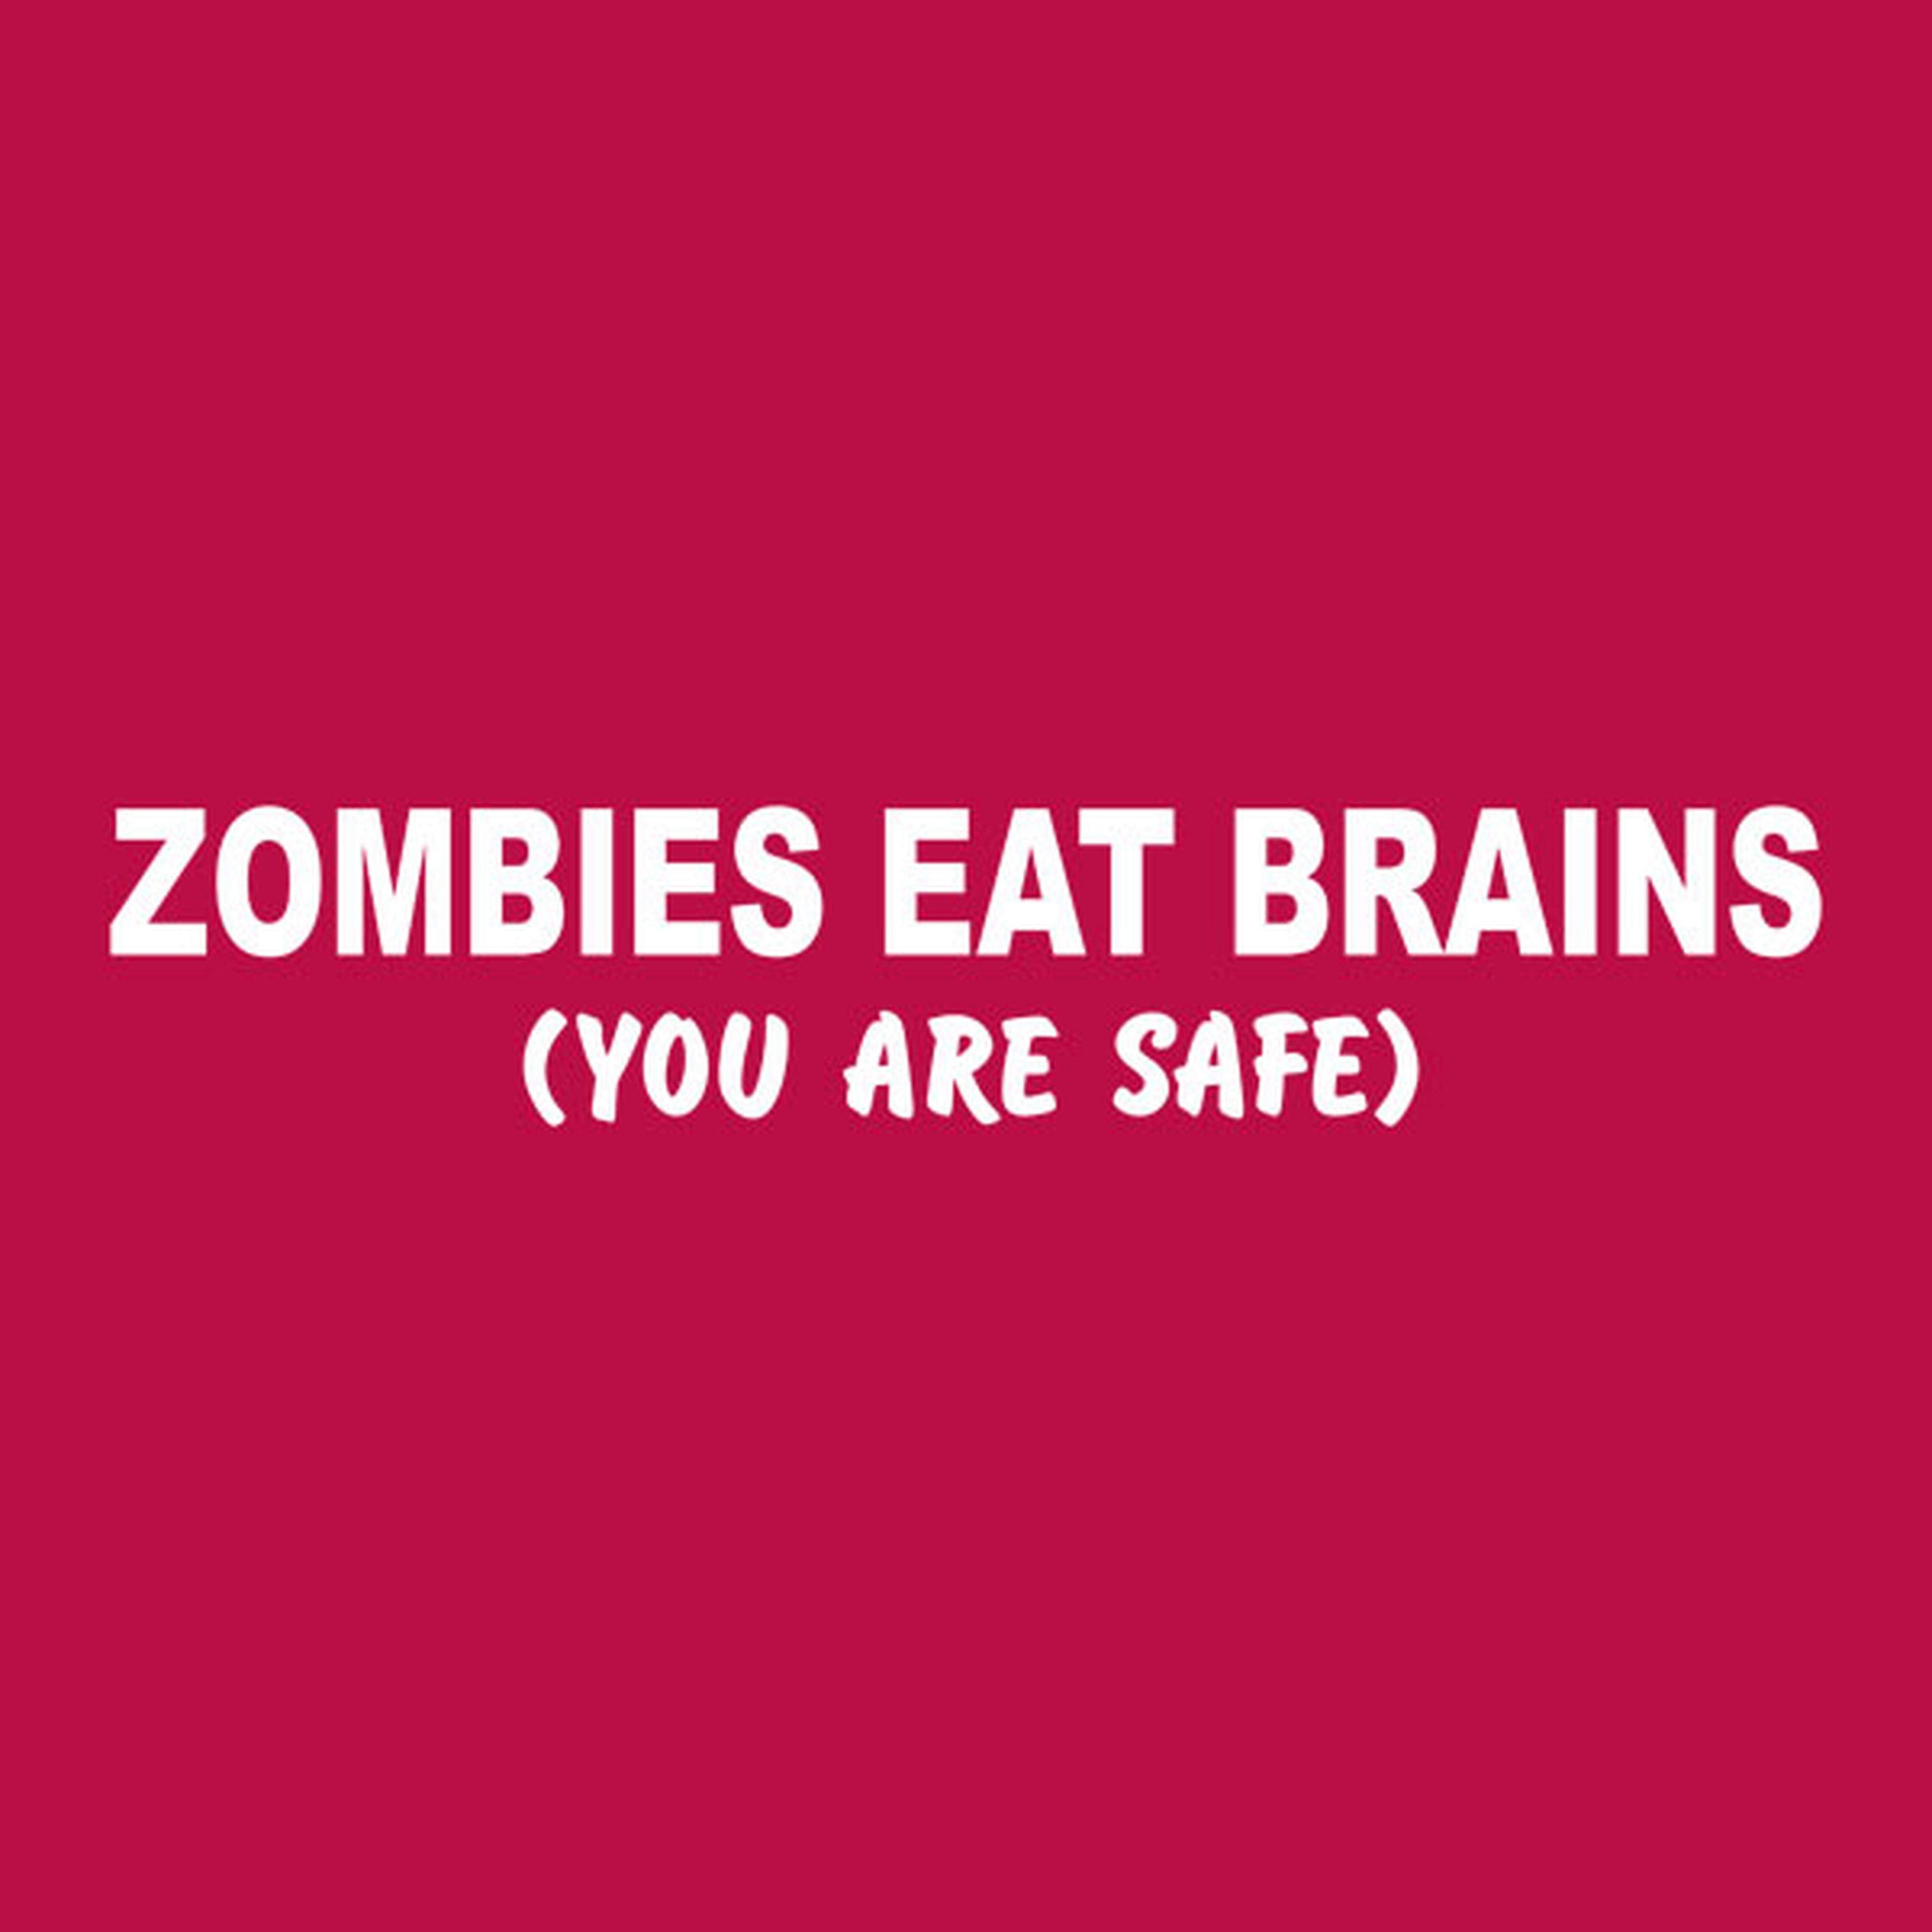 Zombies eat brains. You are safe - T-shirt